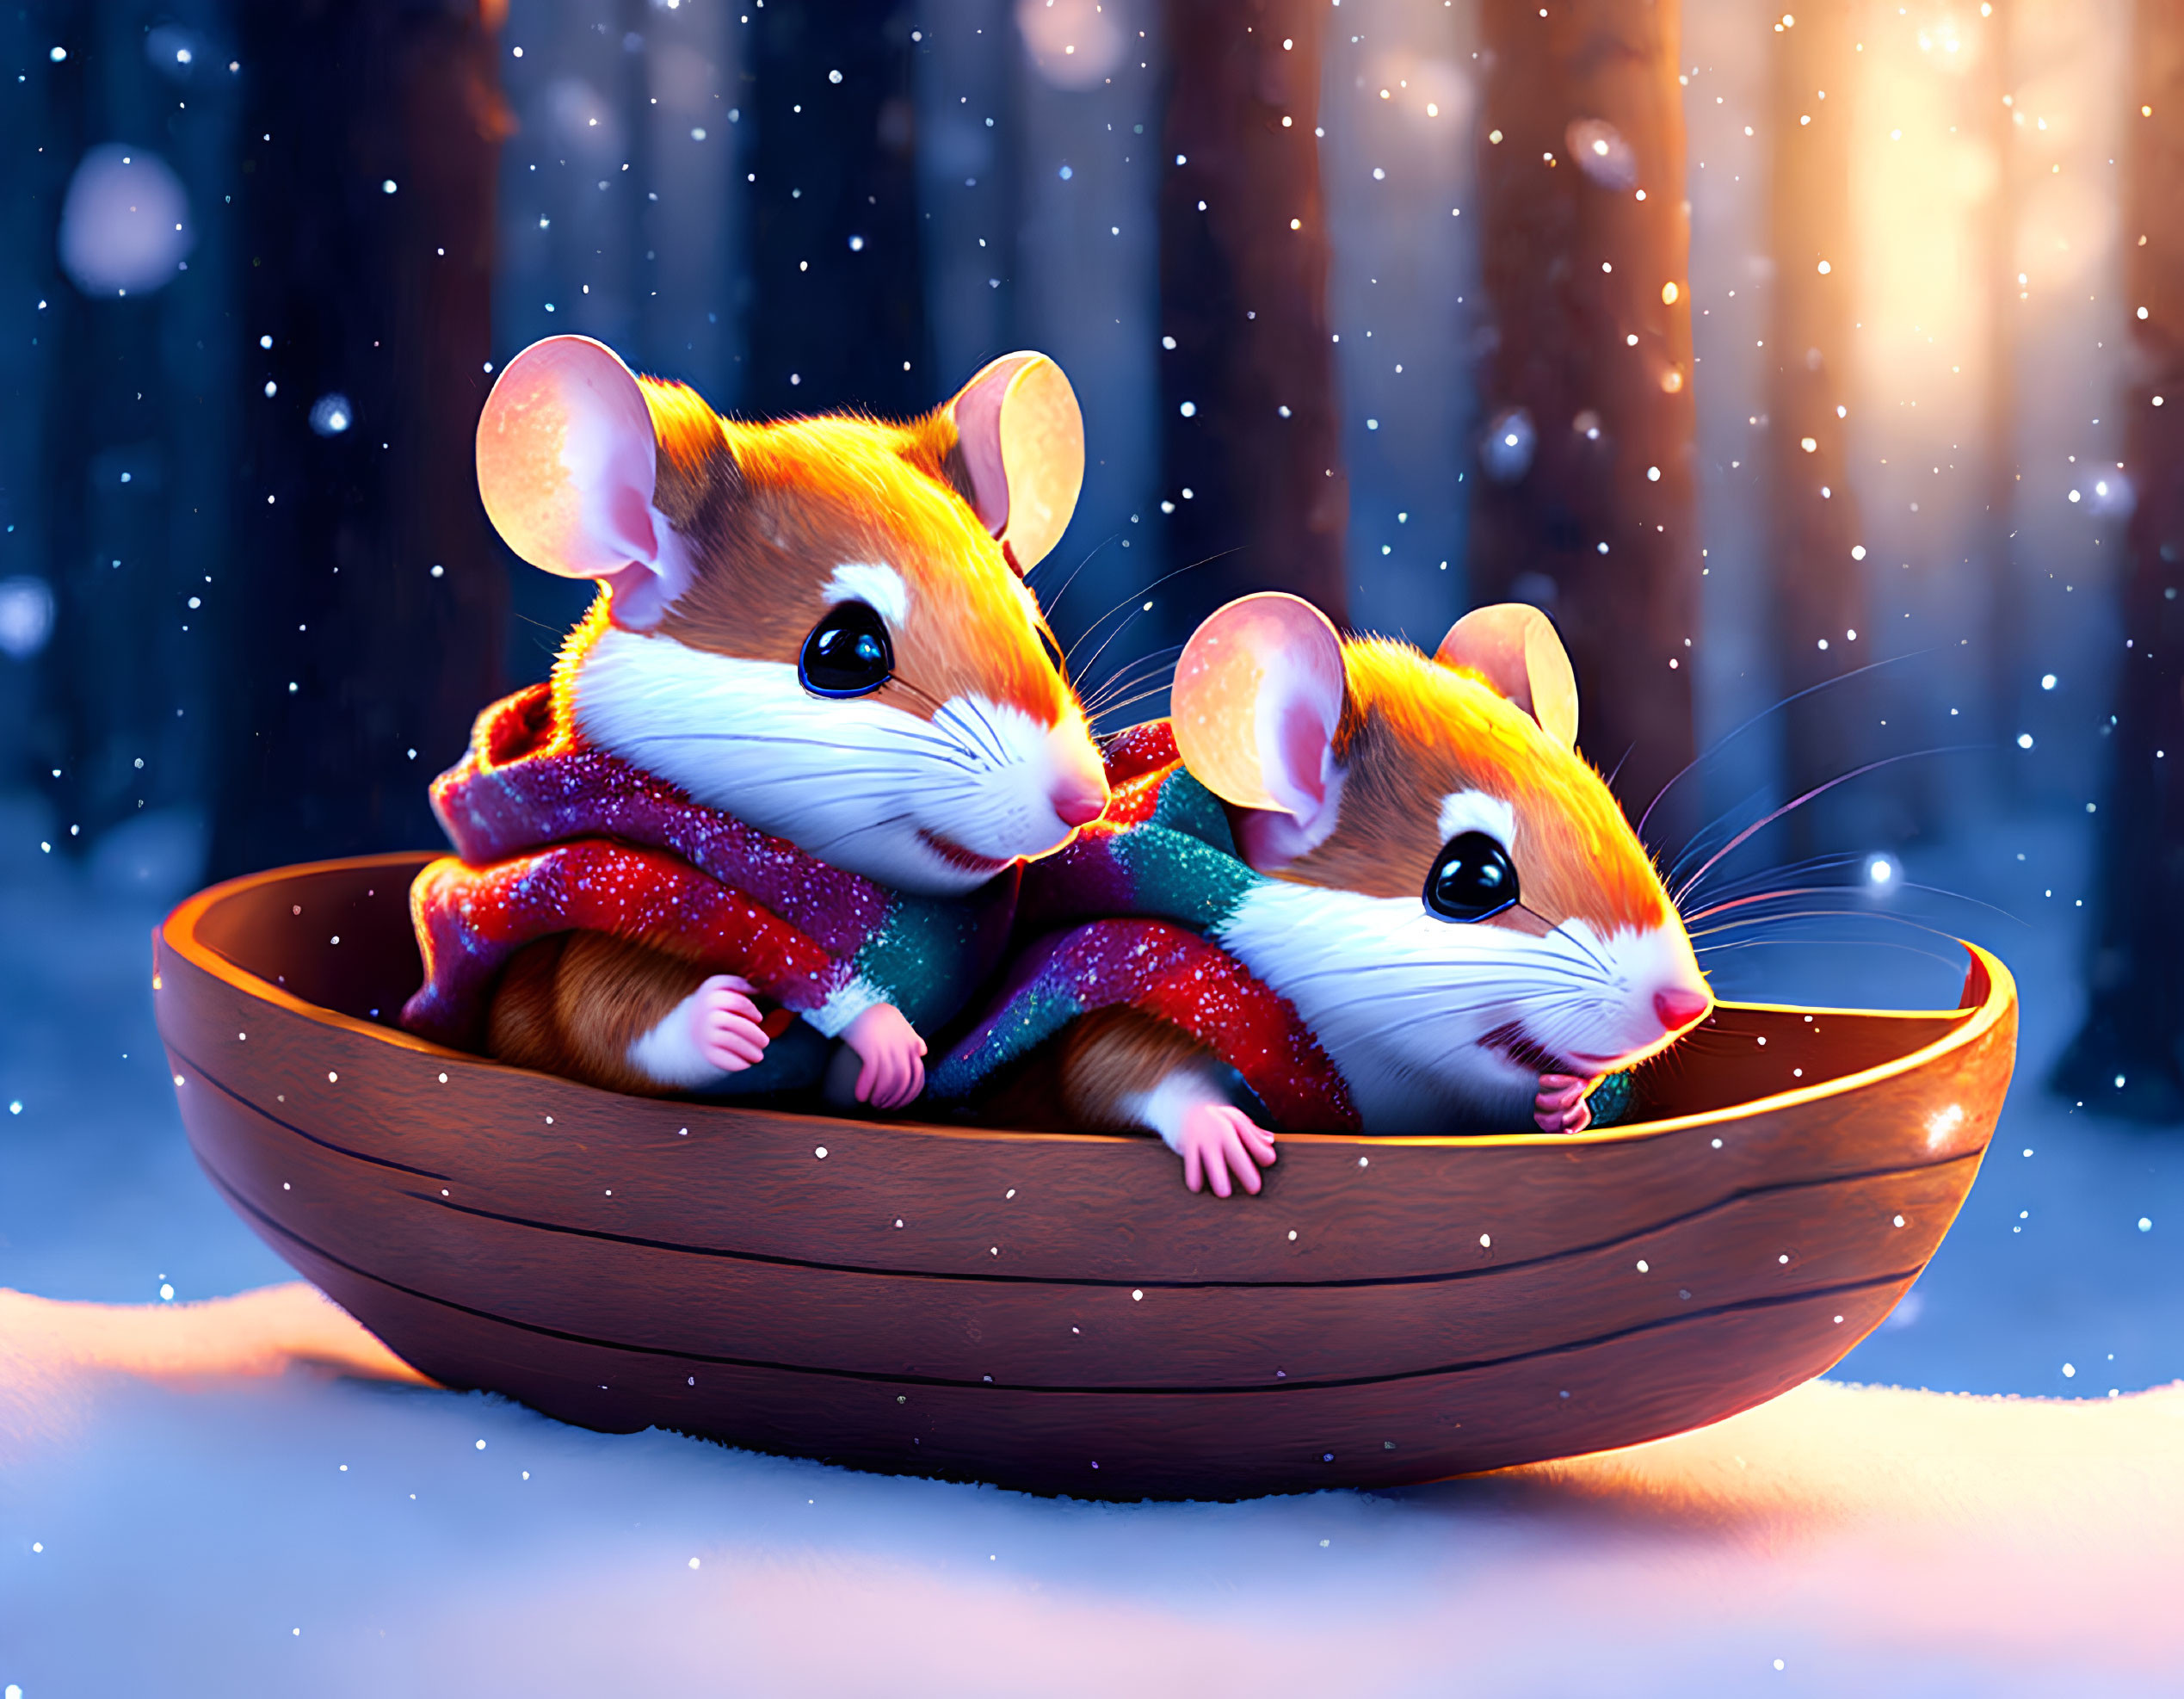 Illustrated mice in colorful scarf inside snowy forest bowl